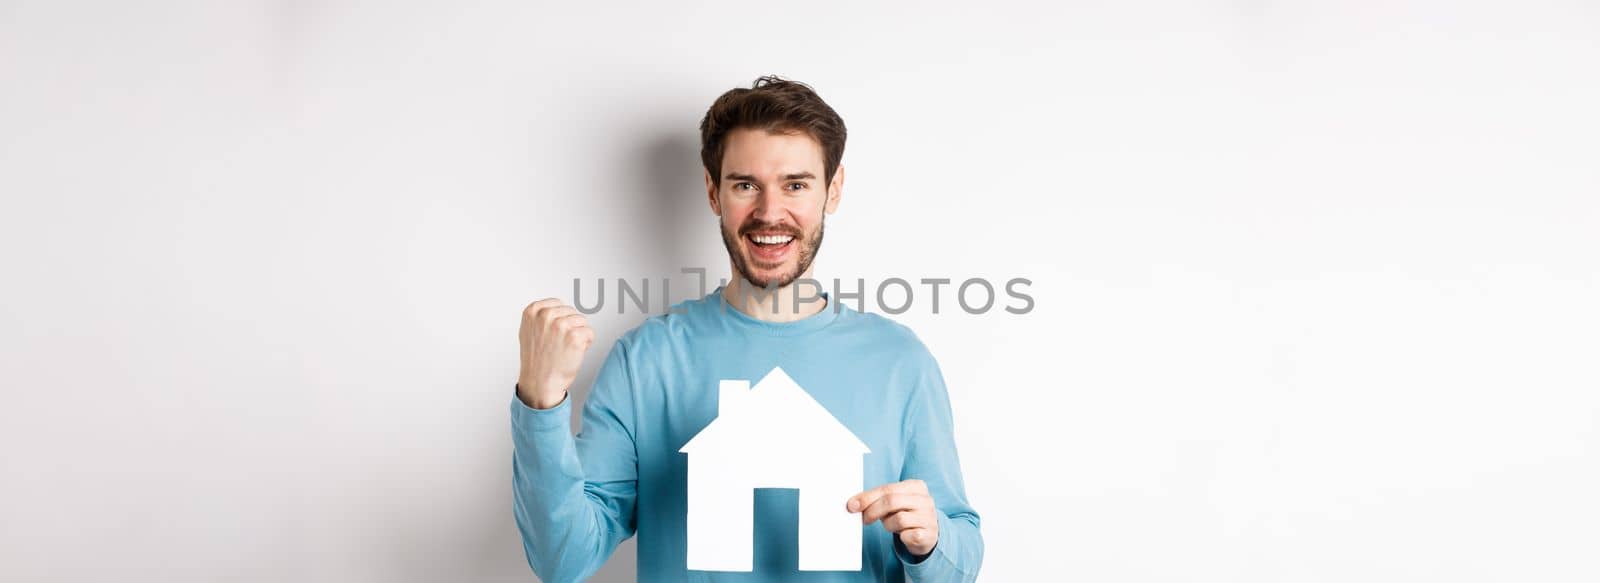 Real estate and insurance concept. Cheerful man buying property and celebrating, saying yes and showing paper house cutout, standing on white background.